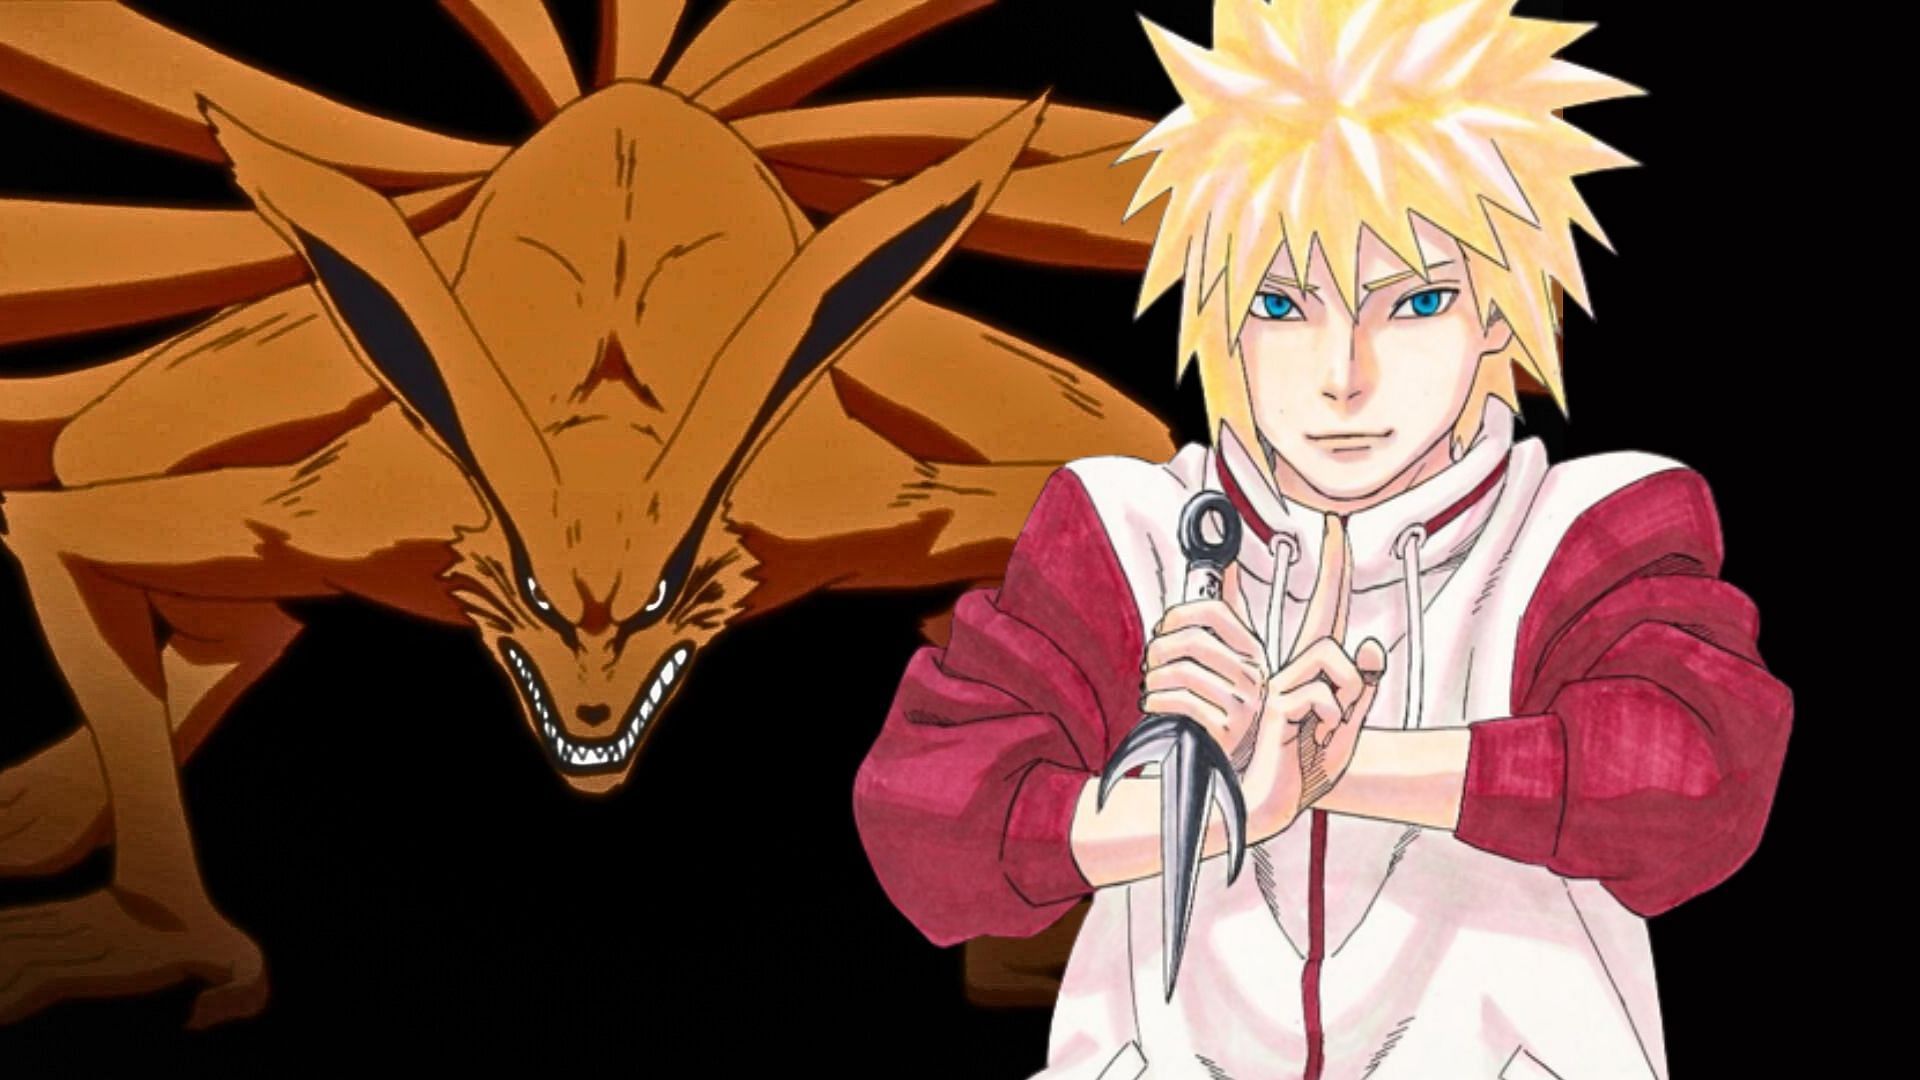 Naruto Online - Continue the tale in first and only official